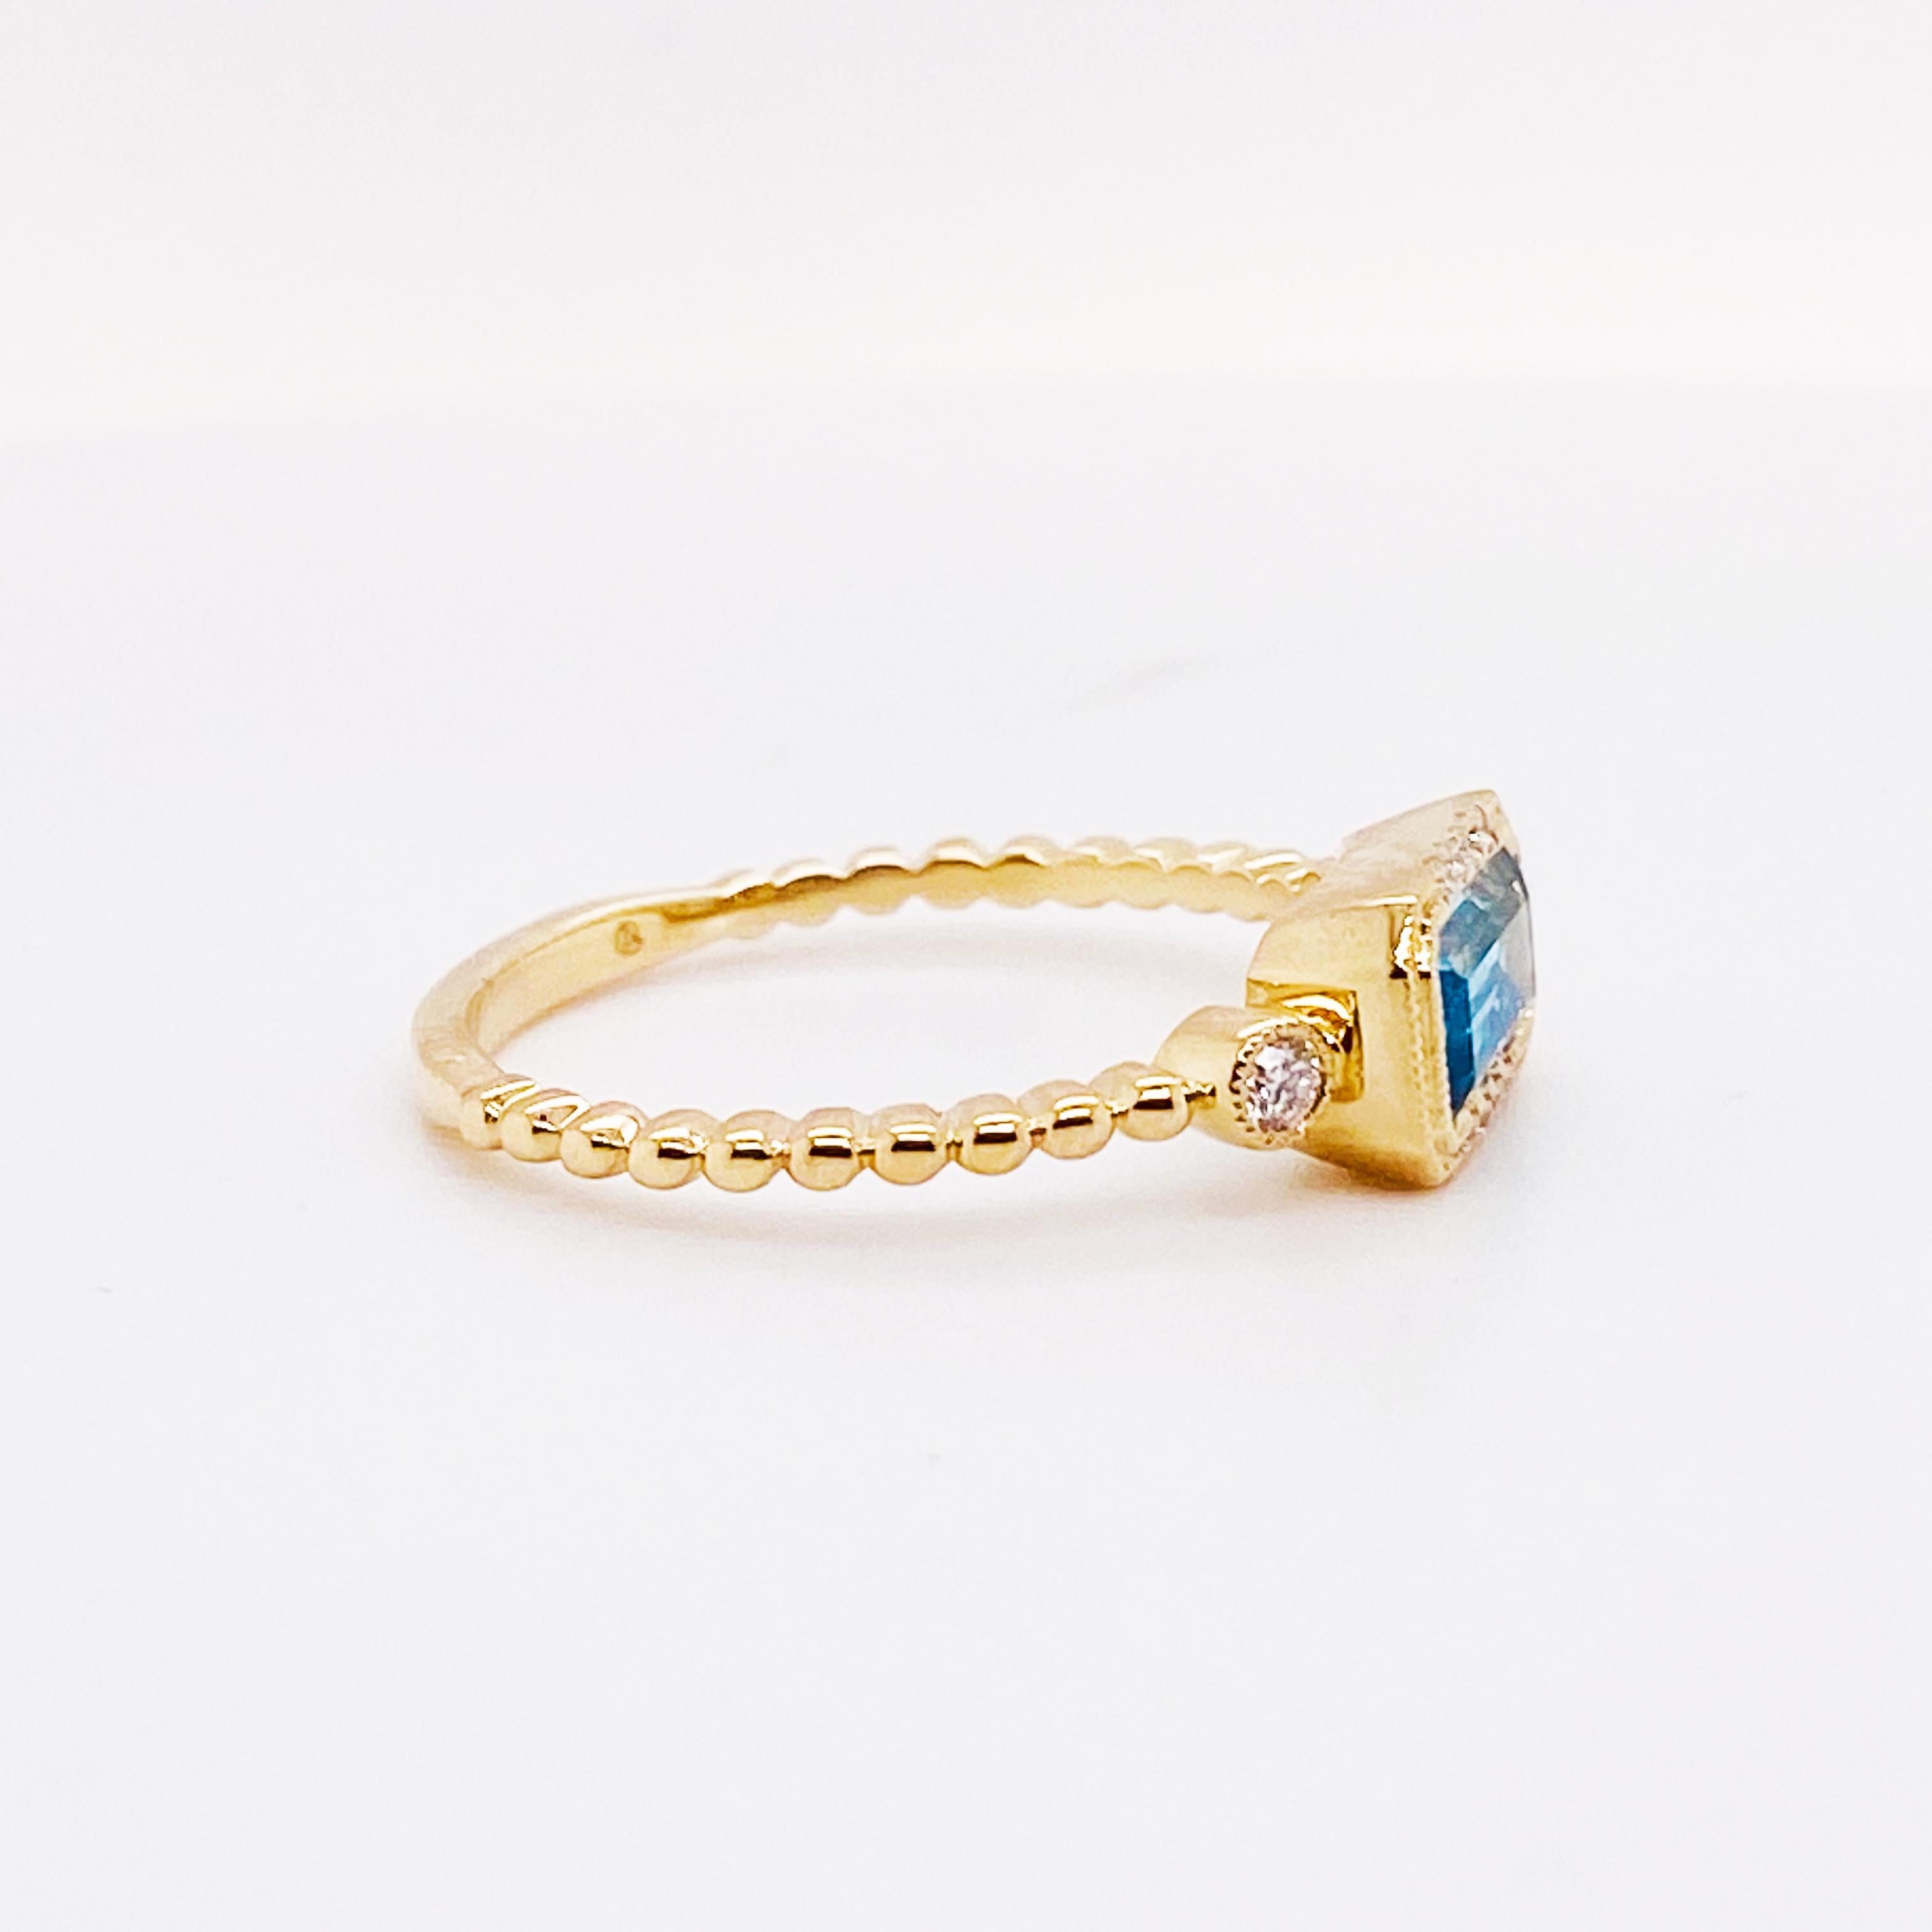 For Sale:  Blue Topaz Diamond Ring 14K Gold Emerald Cut Topaz Modern Ring, East to West 5